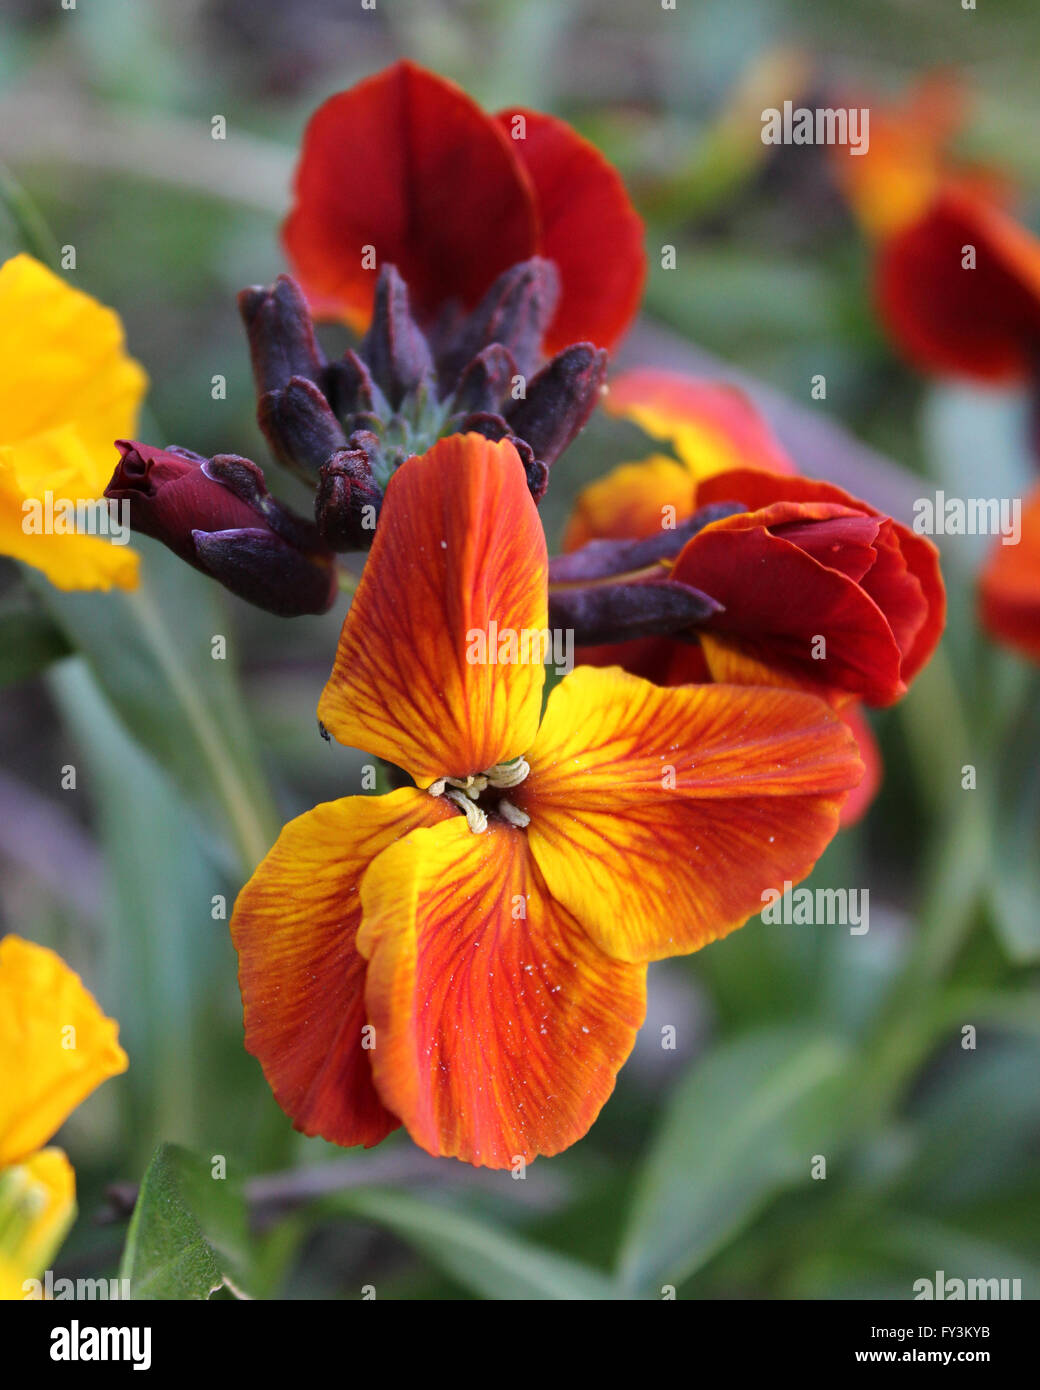 The brightly colored spring flowers of Erysinum cheiri (Cheiranthus) also known as the Wallflower. Stock Photo